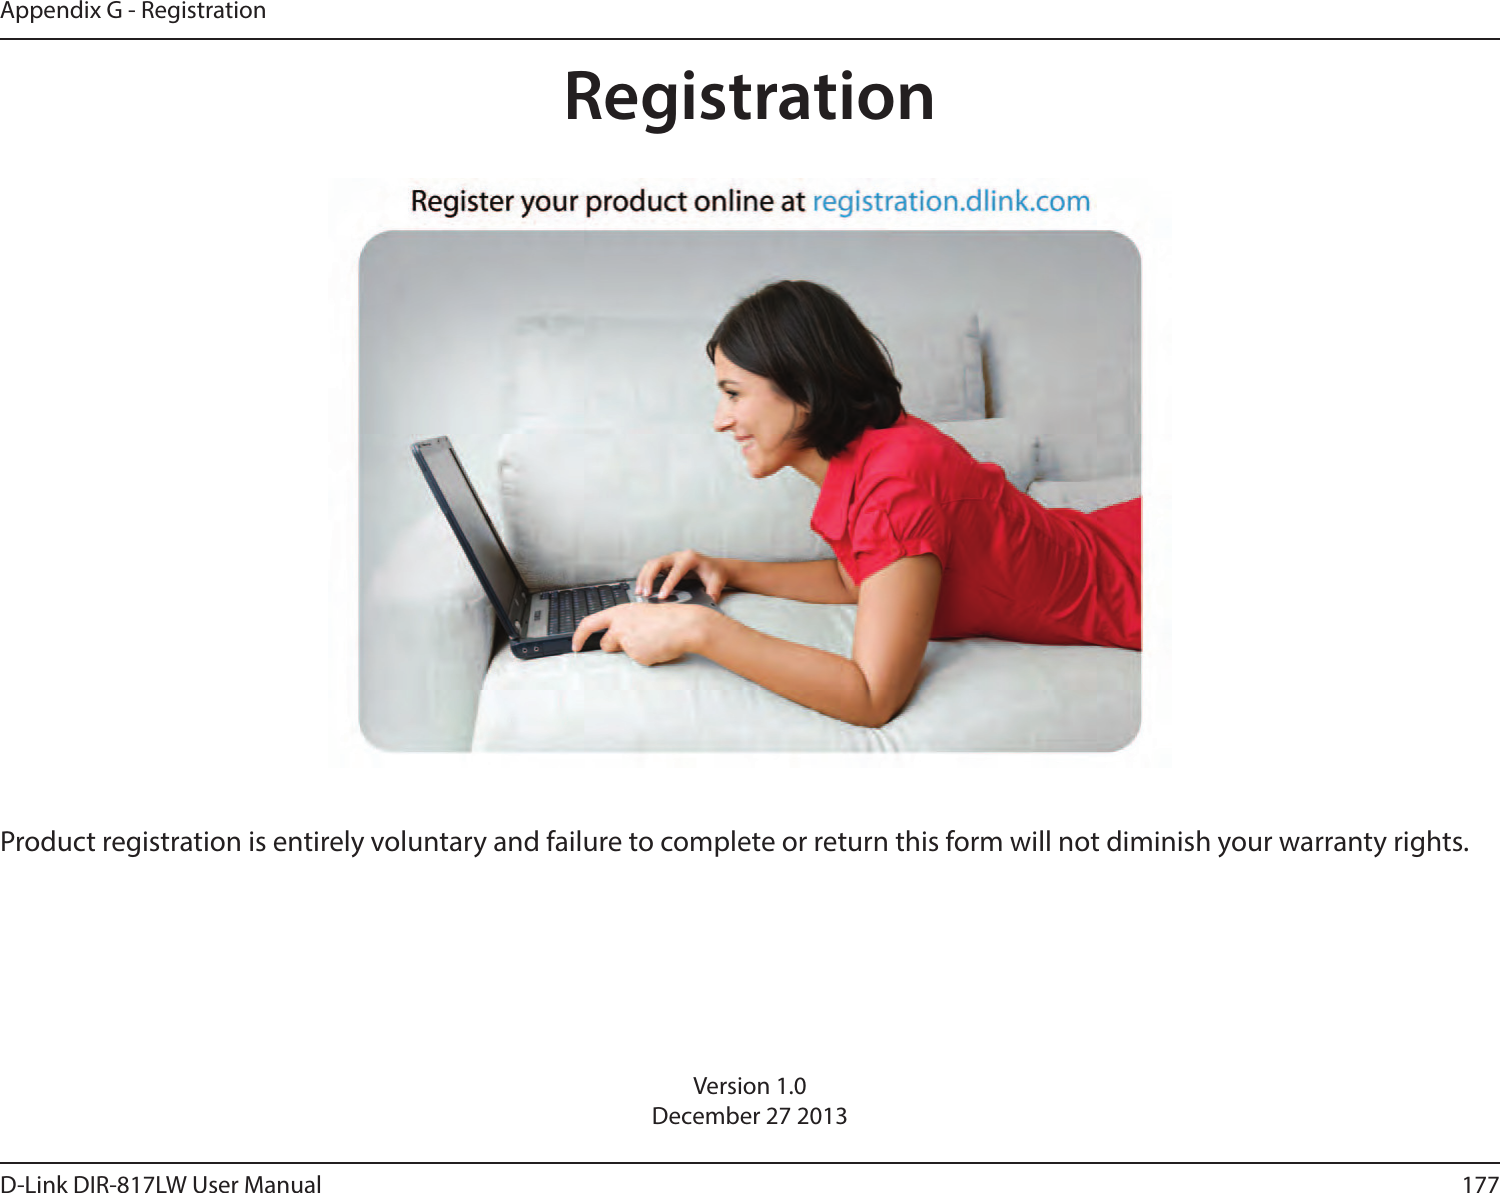 177D-Link DIR-817LW User ManualAppendix G - RegistrationVersion 1.0December 27 2013Product registration is entirely voluntary and failure to complete or return this form will not diminish your warranty rights.Registration